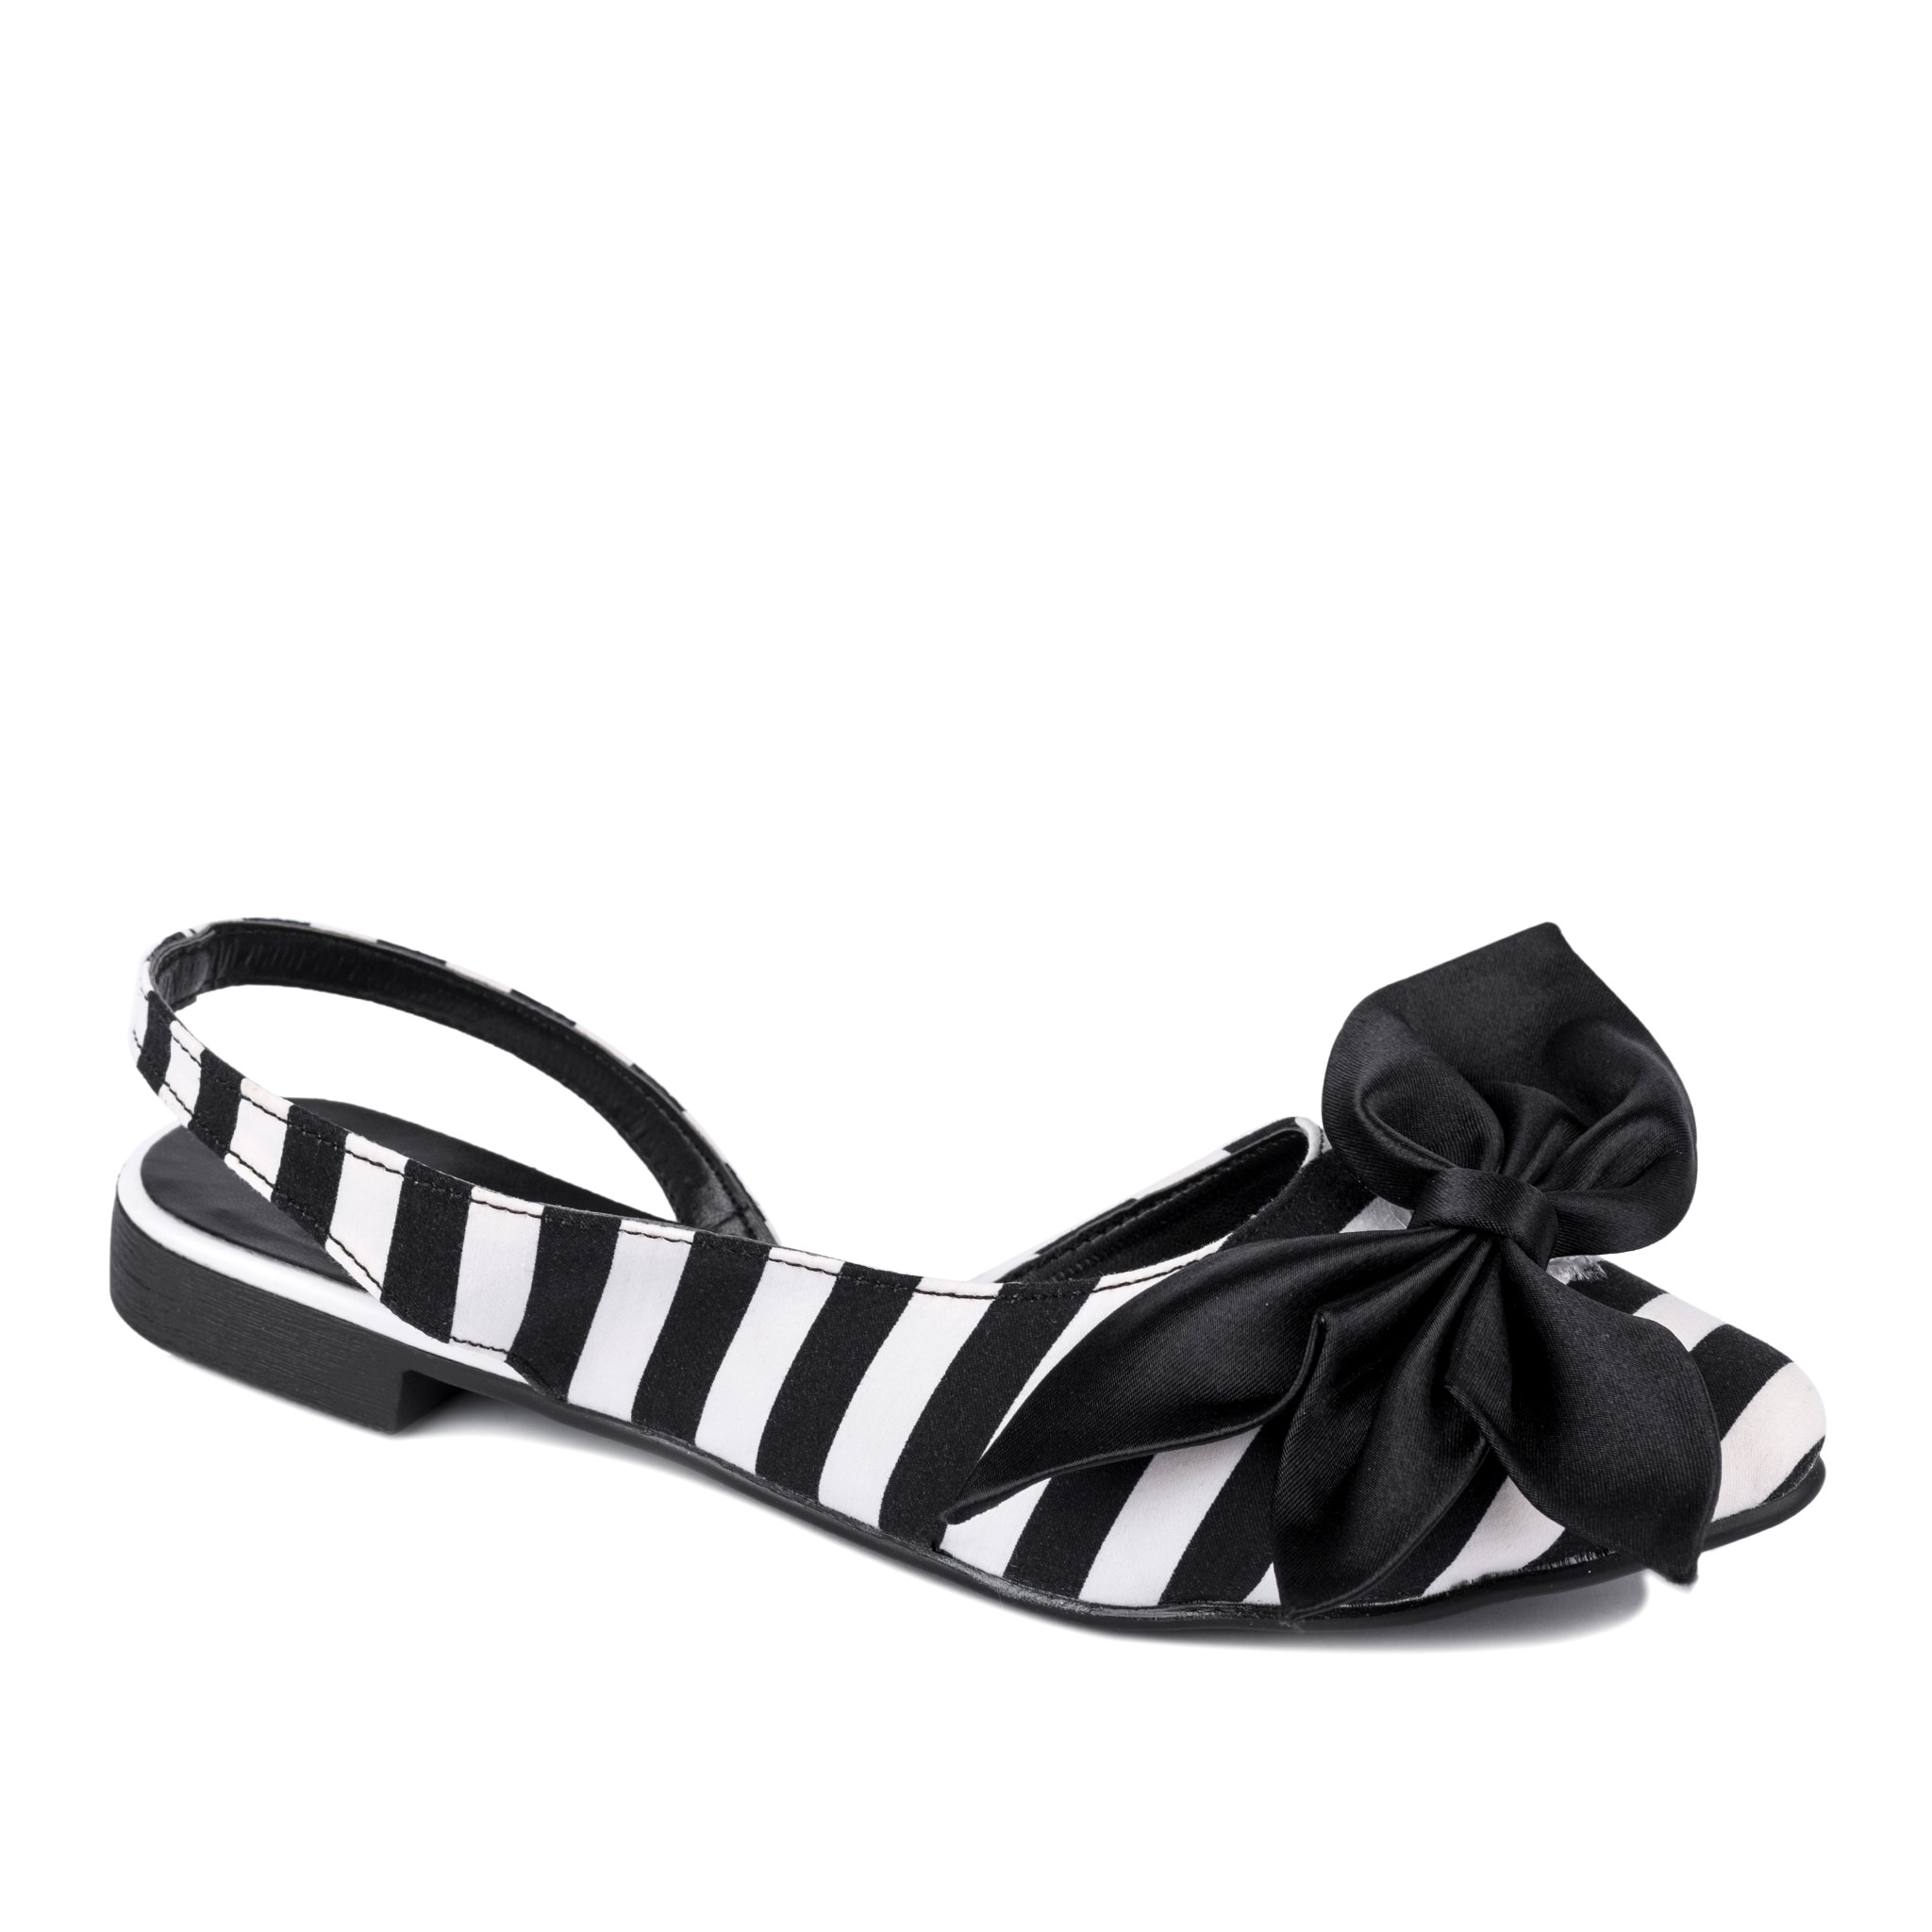 STRIPED FLATS WITH BLACK BOW - BLACK/WHITE